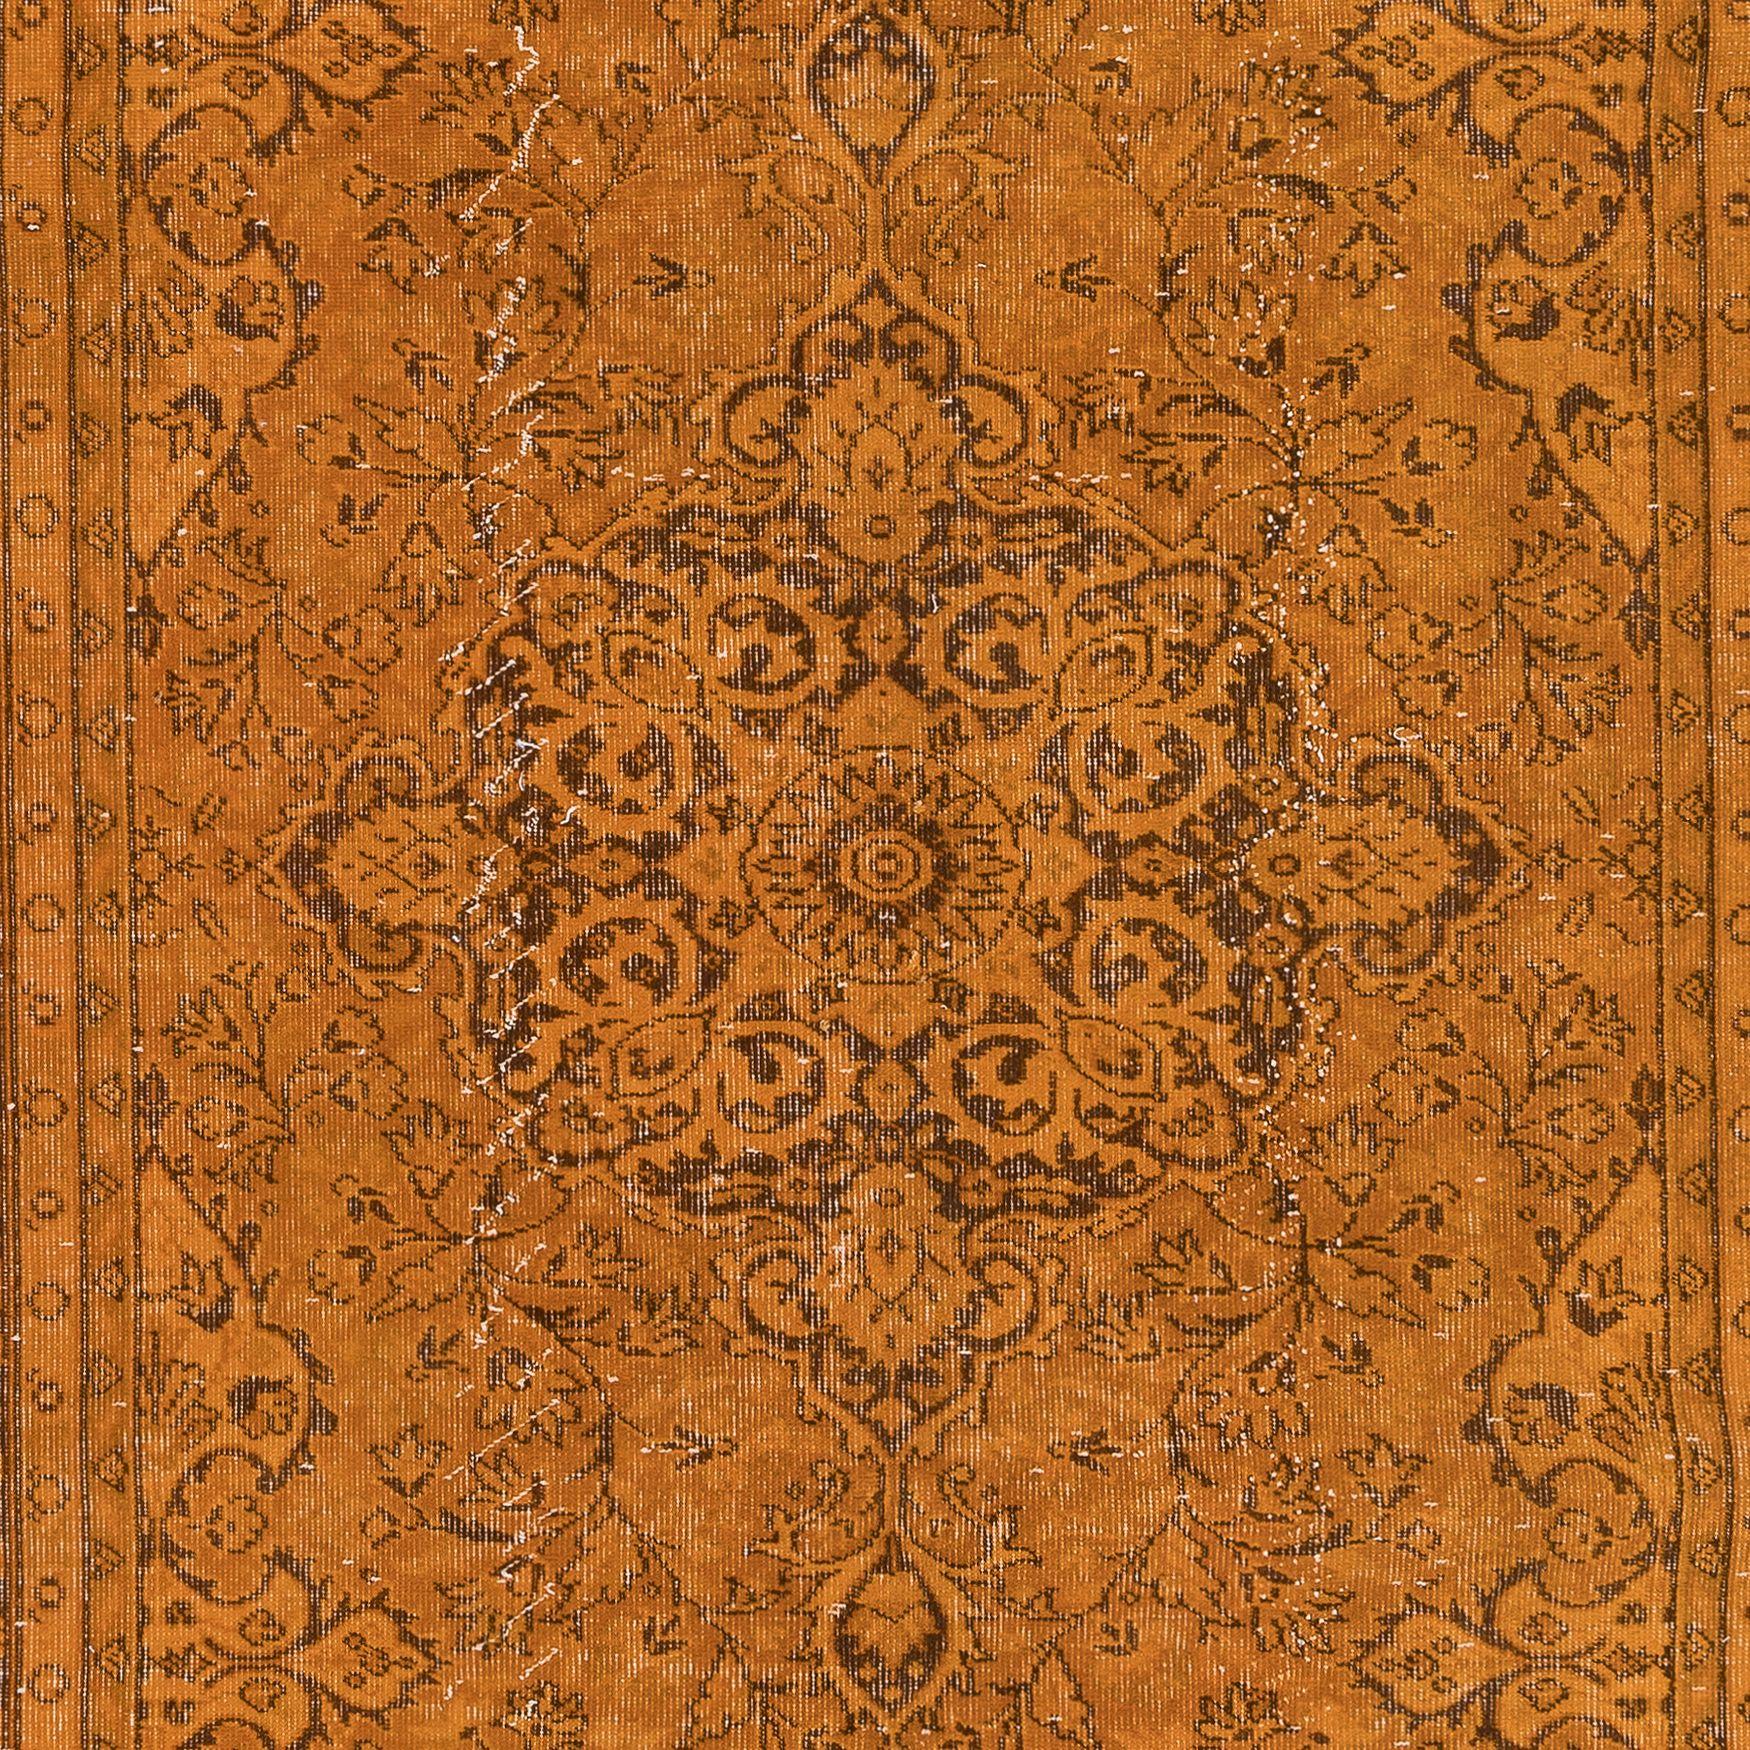 Turkish 5.7x9 Ft Hand-Made Central Anatolian Area Rug in Orange, Modern Wool Carpet For Sale